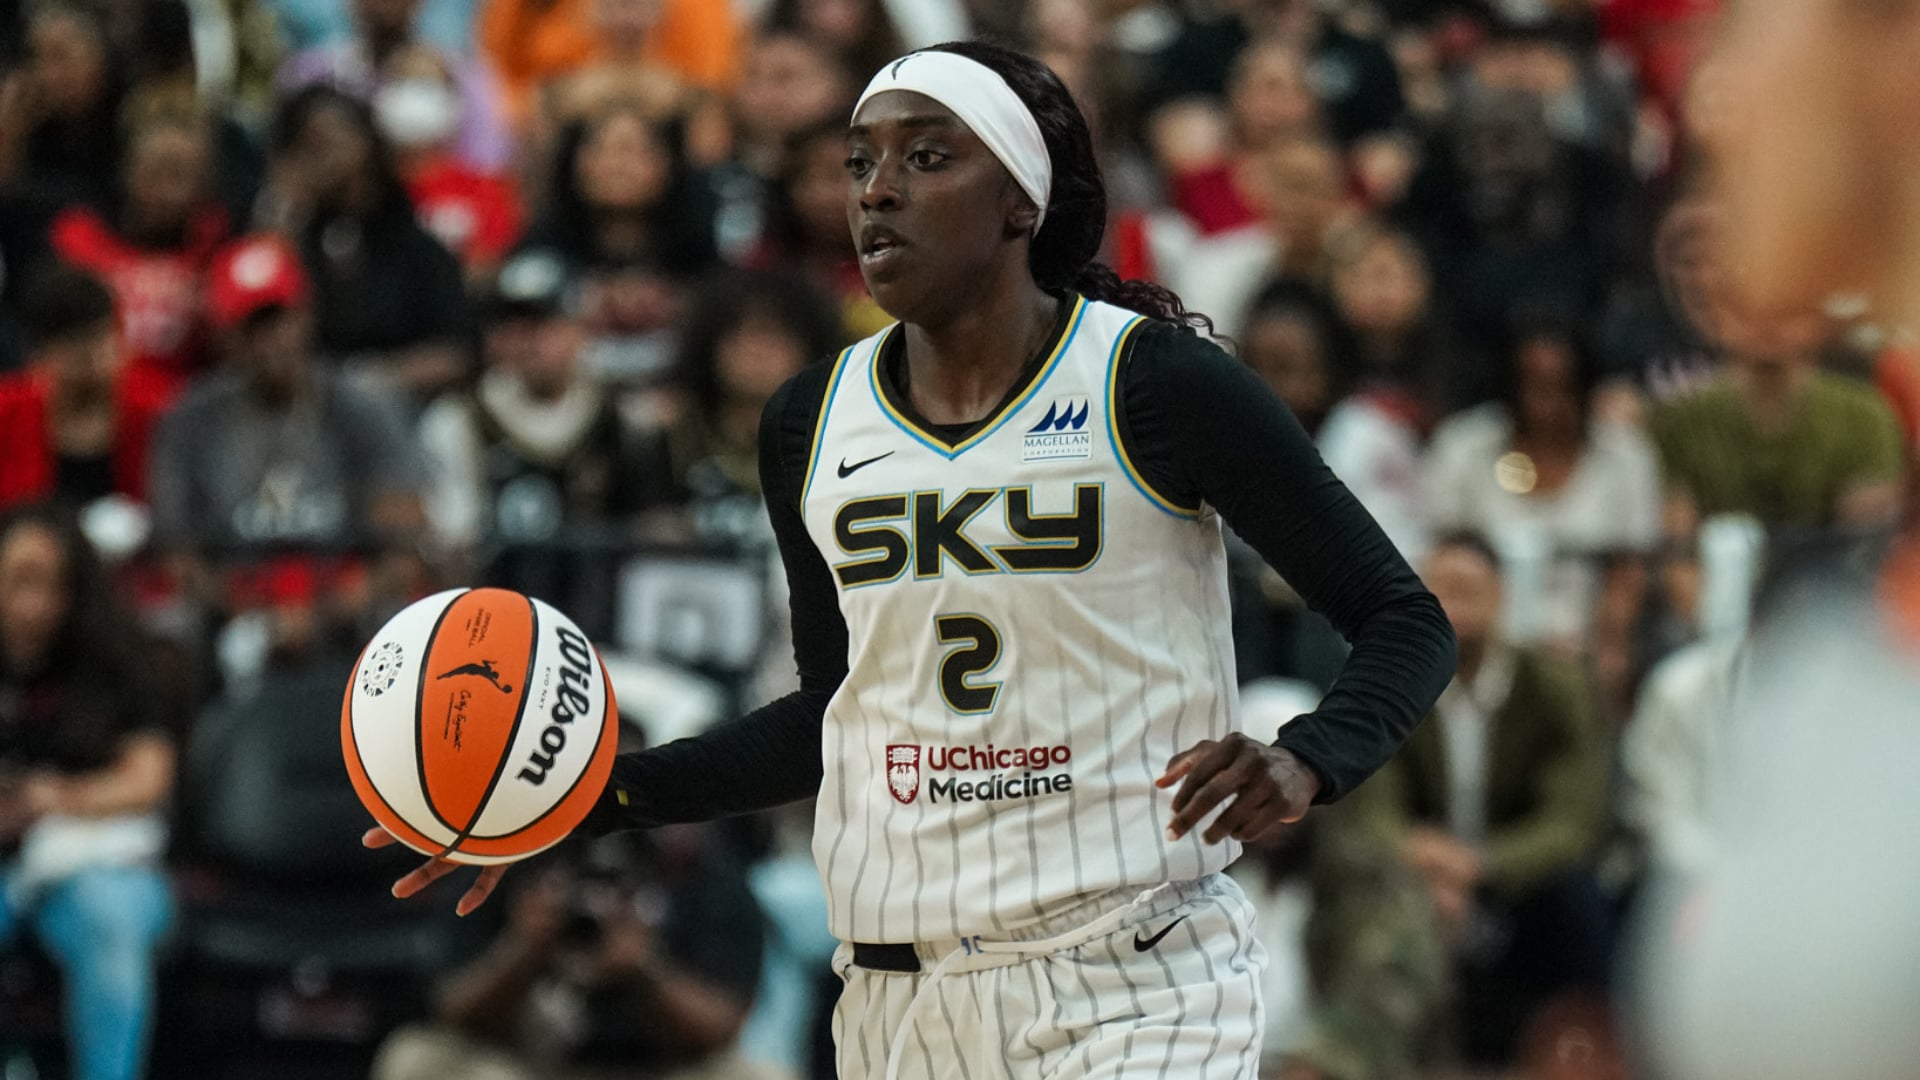 Chicago Sky - Highlighting all things Kahleah Copper